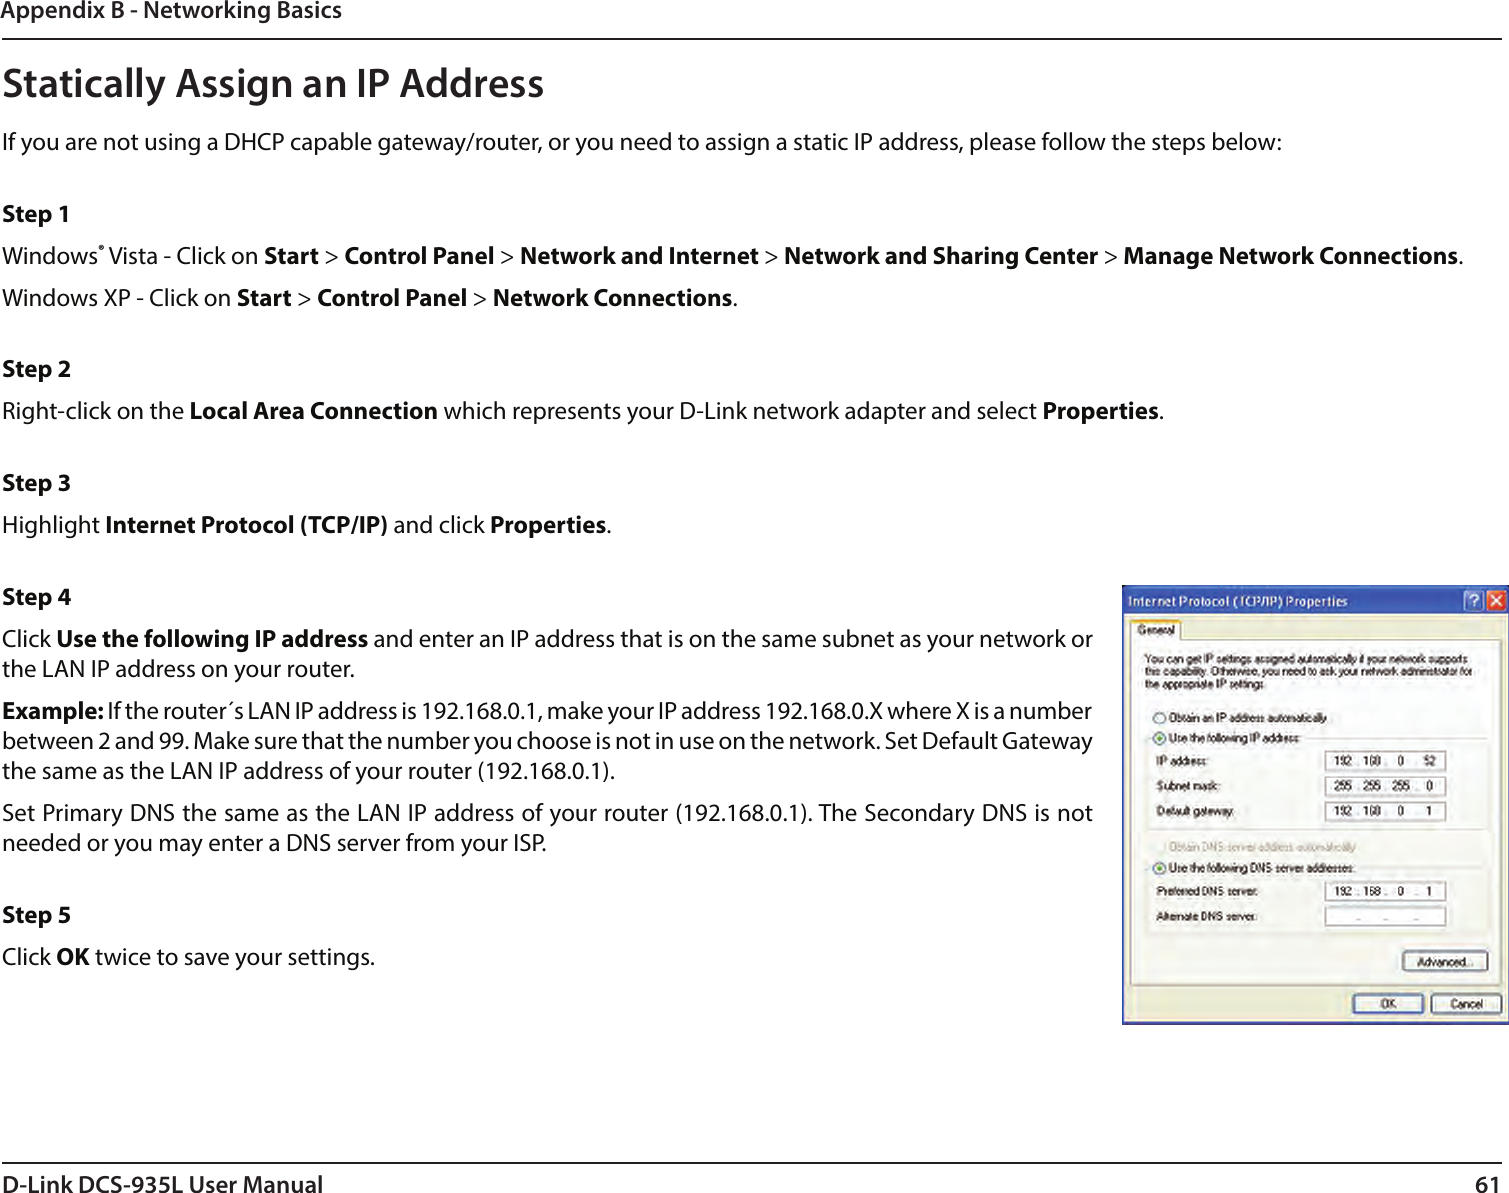 61D-Link DCS-935L User ManualAppendix B - Networking BasicsStatically Assign an IP AddressIf you are not using a DHCP capable gateway/router, or you need to assign a static IP address, please follow the steps below: Step 1Windows® Vista - Click on Start &gt; Control Panel &gt; Network and Internet &gt; Network and Sharing Center &gt; Manage Network Connections. Windows XP - Click on Start &gt; Control Panel &gt; Network Connections. Step 2Right-click on the Local Area Connection which represents your D-Link network adapter and select Properties. Step 3Highlight Internet Protocol (TCP/IP) and click Properties. Step 4Click Use the following IP address and enter an IP address that is on the same subnet as your network or the LAN IP address on your router. Example: If the router´s LAN IP address is 192.168.0.1, make your IP address 192.168.0.X where X is a number between 2 and 99. Make sure that the number you choose is not in use on the network. Set Default Gateway the same as the LAN IP address of your router (192.168.0.1). Set Primary DNS the same as the LAN IP address of your router (192.168.0.1). The Secondary DNS is not needed or you may enter a DNS server from your ISP. Step 5Click OK twice to save your settings.